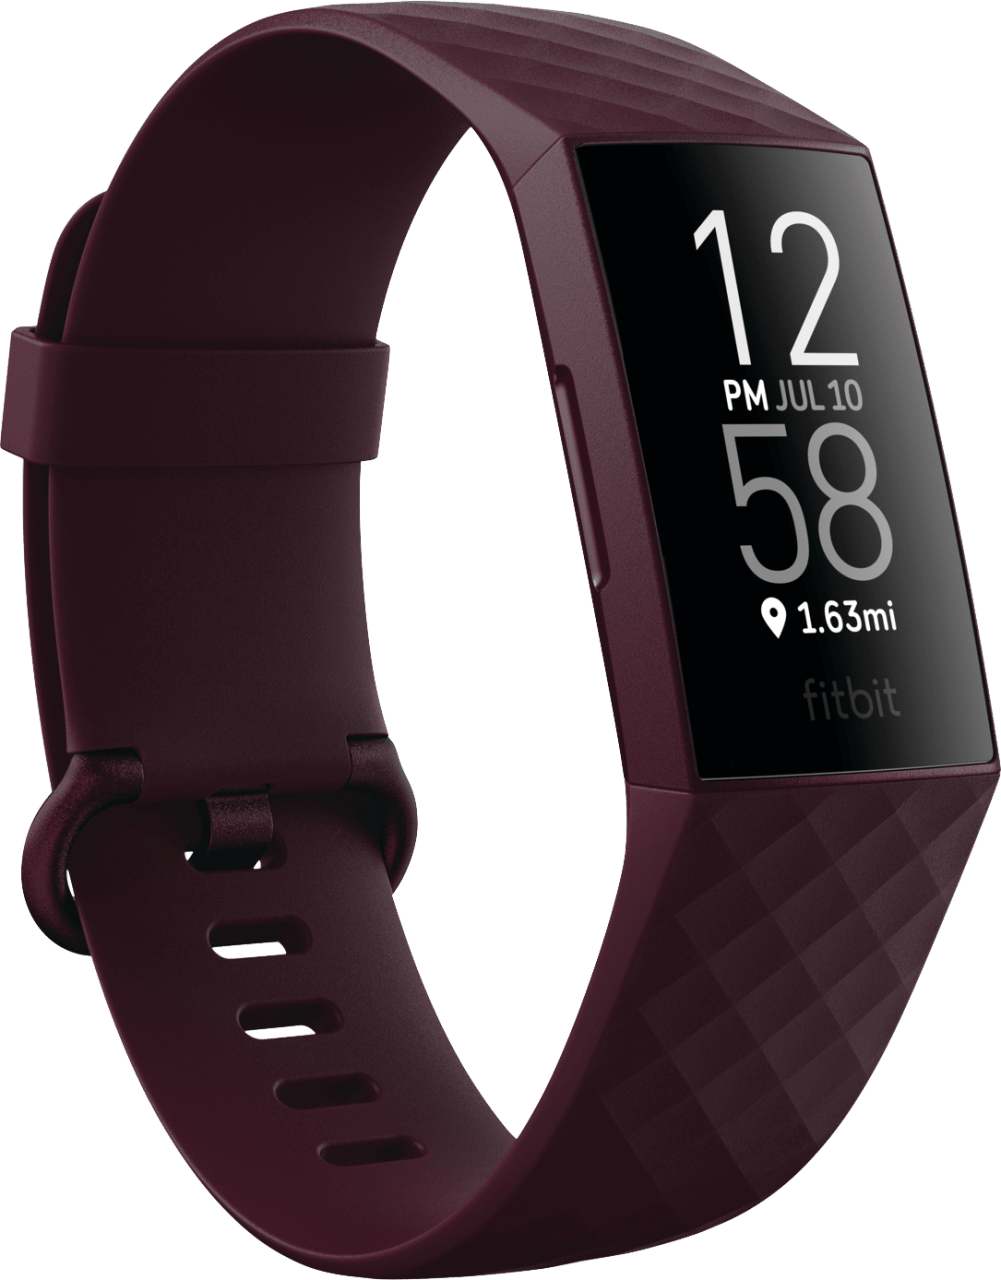 Rosewood Fitbit Charge 4 Activity Tracker.3